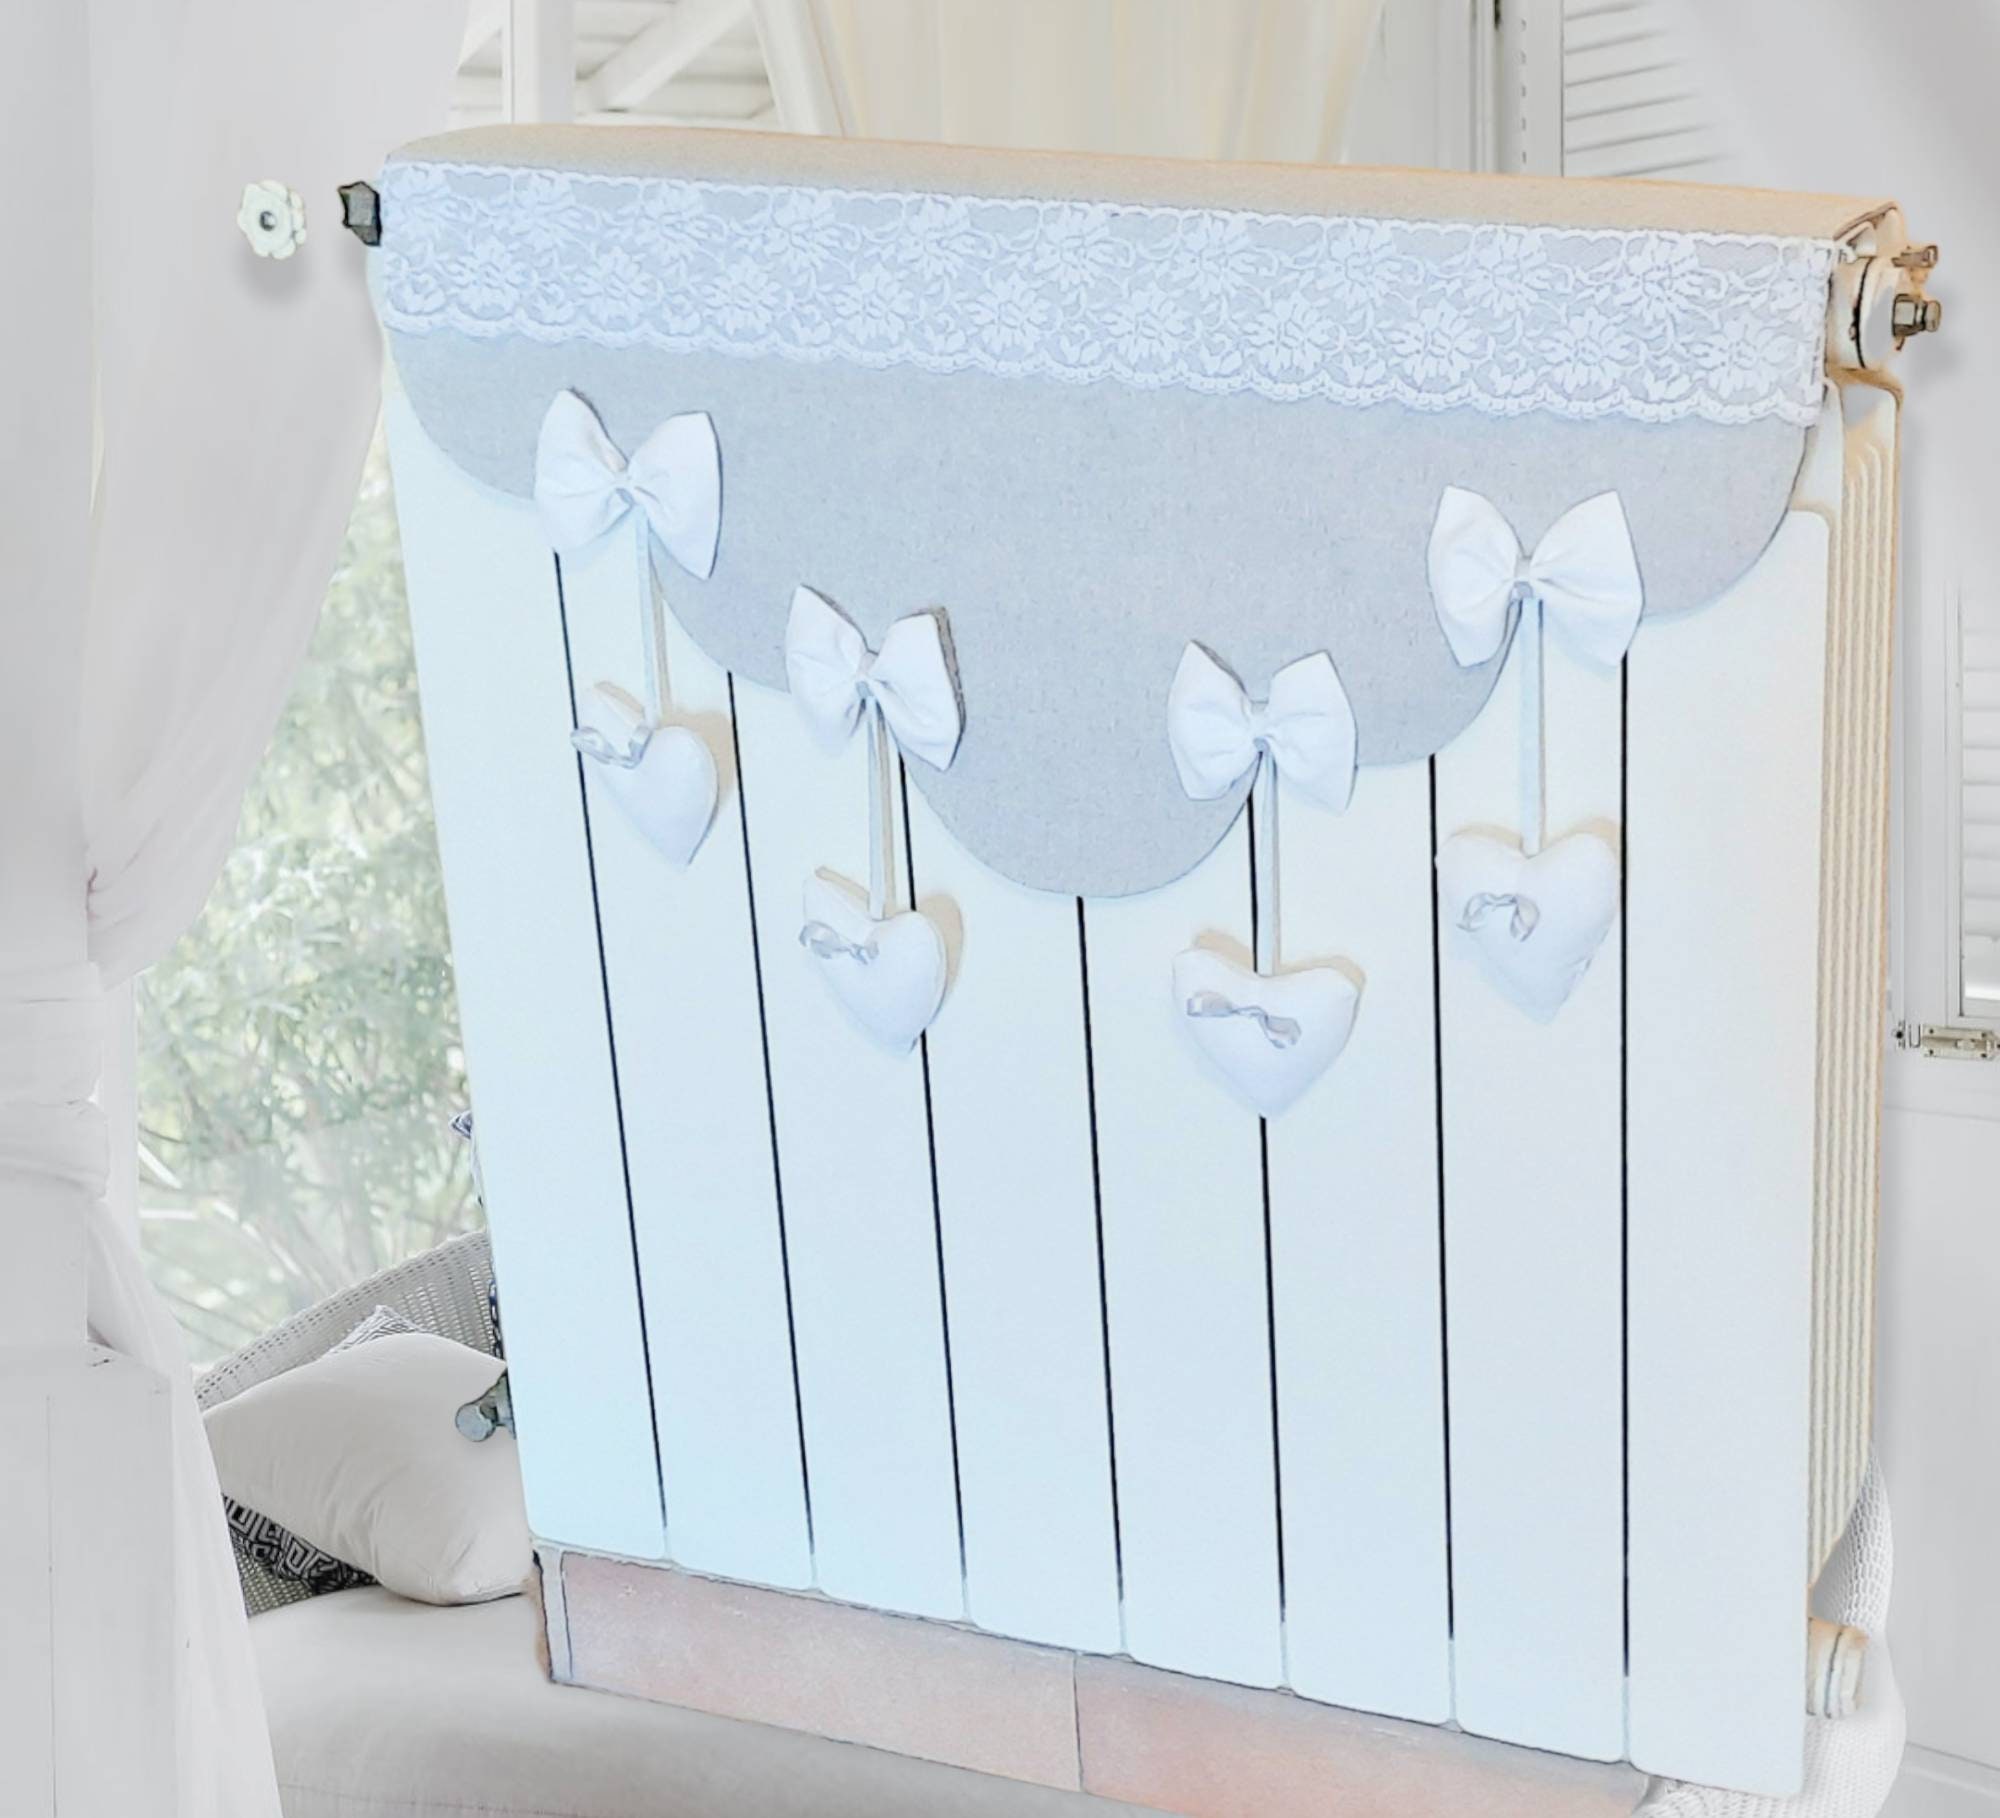 Shabby Country Chic Radiator Cover elisea Model, Symmetrical Waves in  Scale, Bows Holding Hearts Suspended From Satin Ribbons -  Ireland